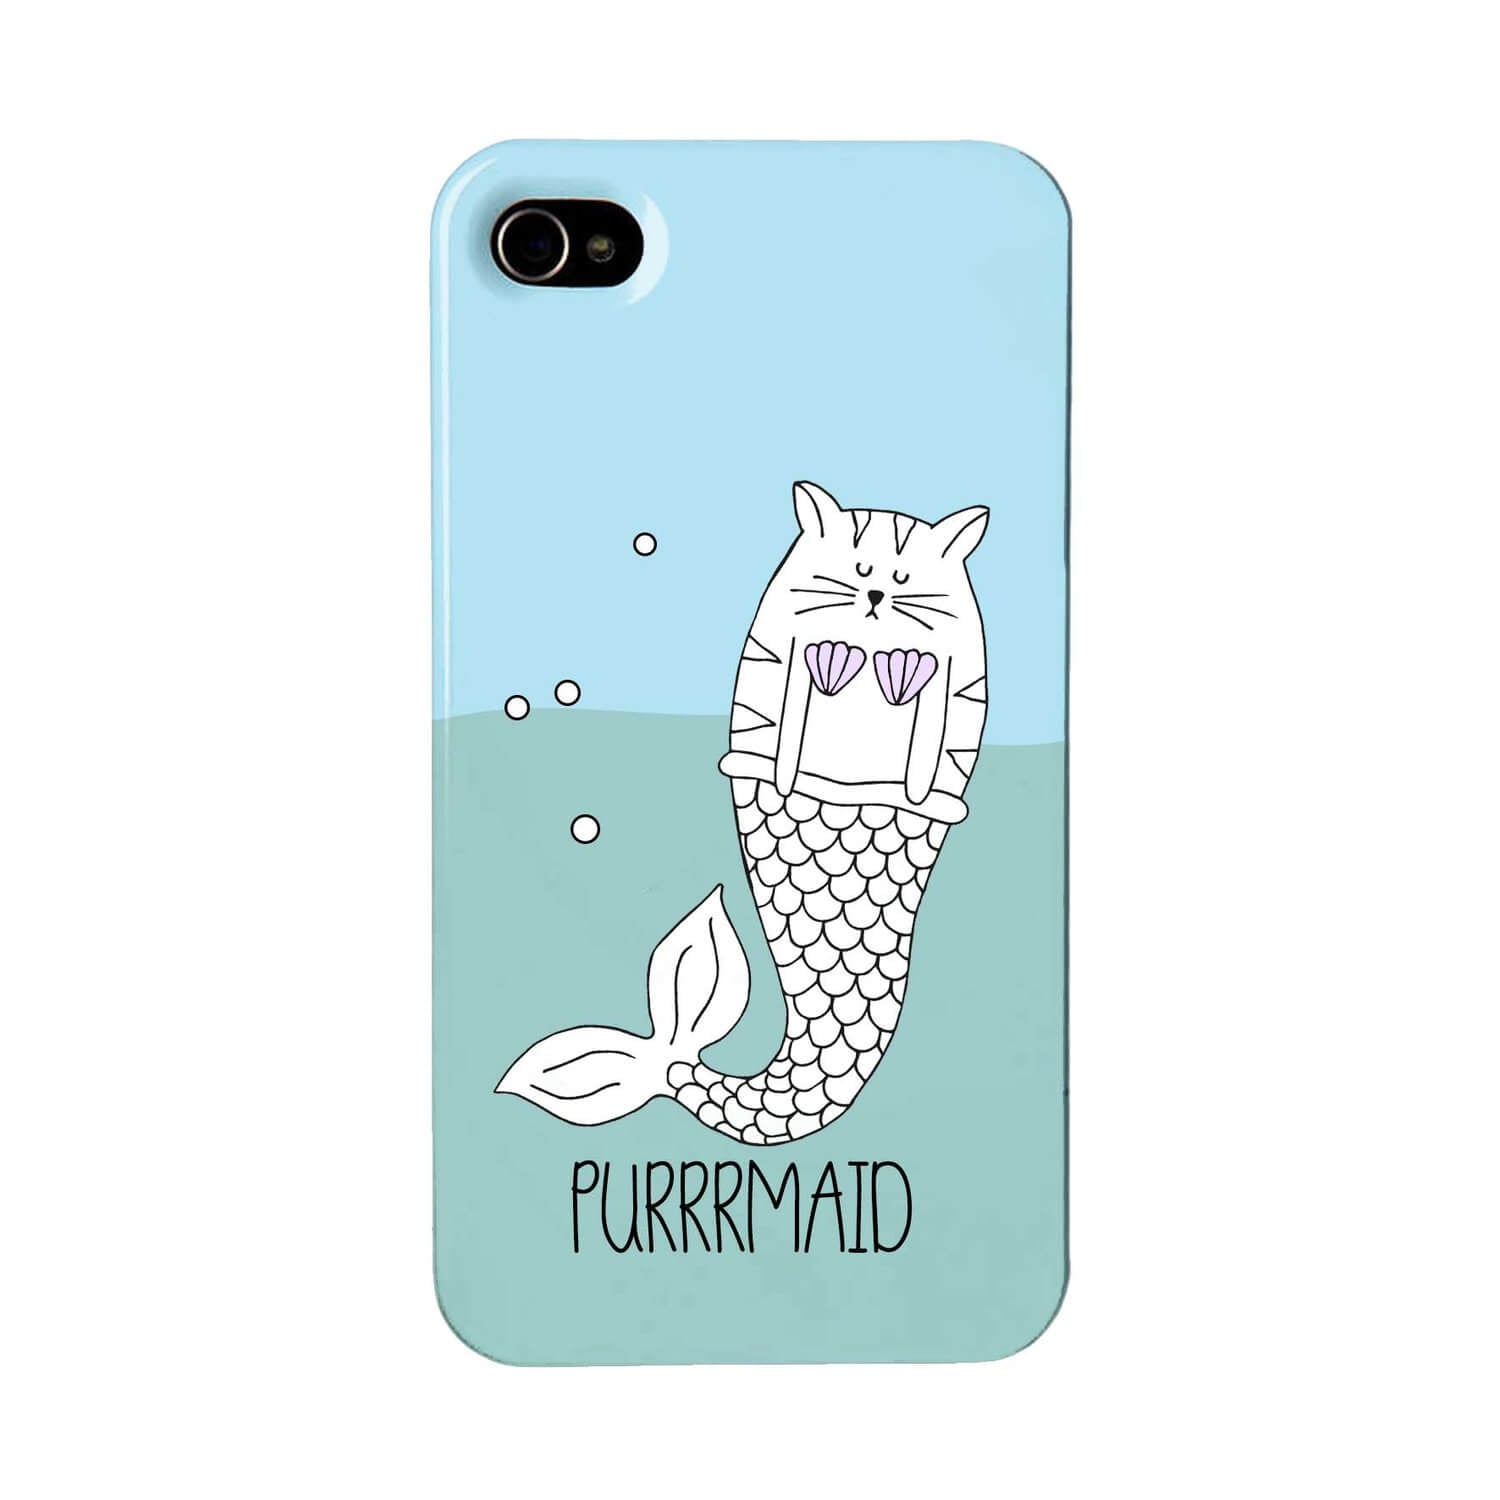 Blue phone case featuring an illustration of a purrmaid - cat mermaid